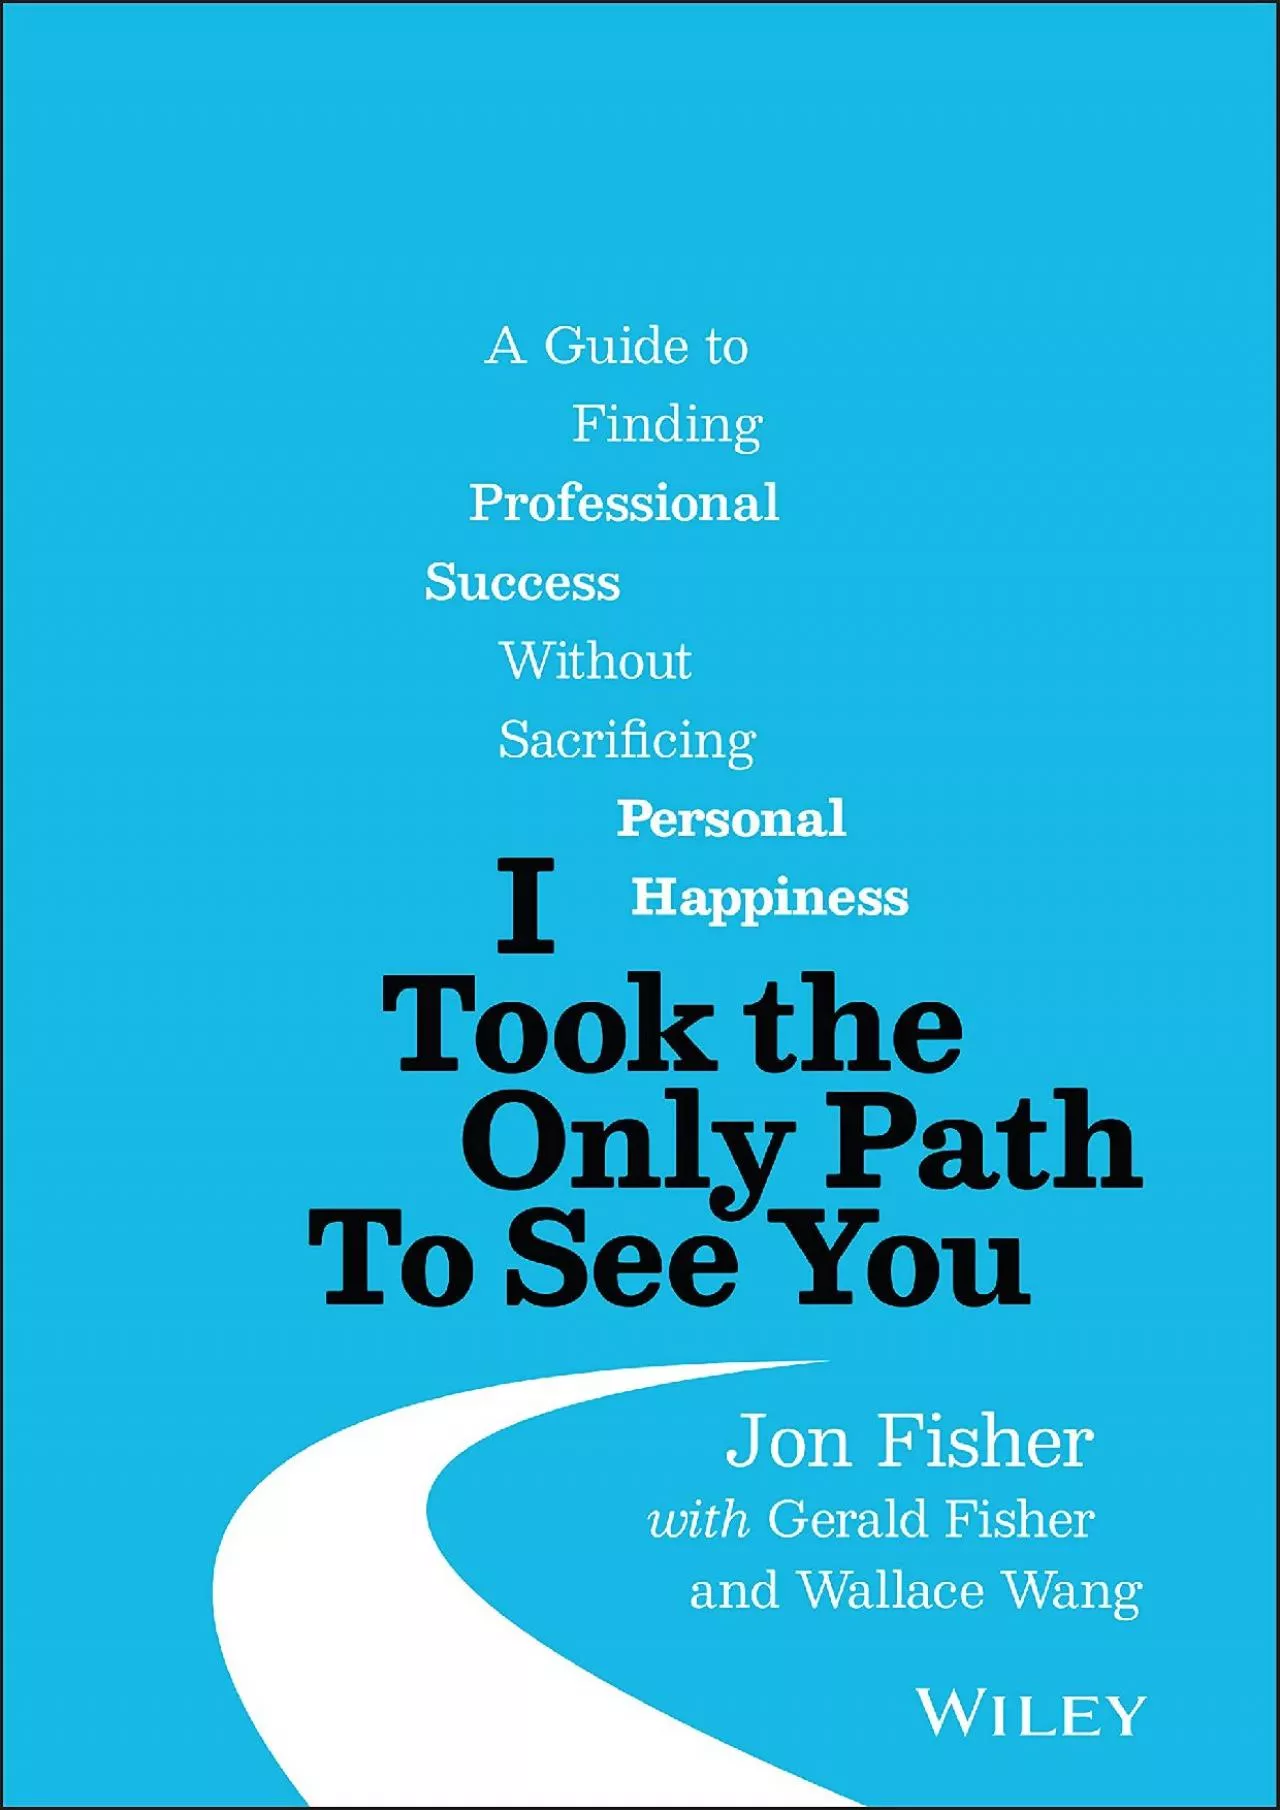 (BOOK)-I Took the Only Path To See You: A Guide to Finding Professional Success Without